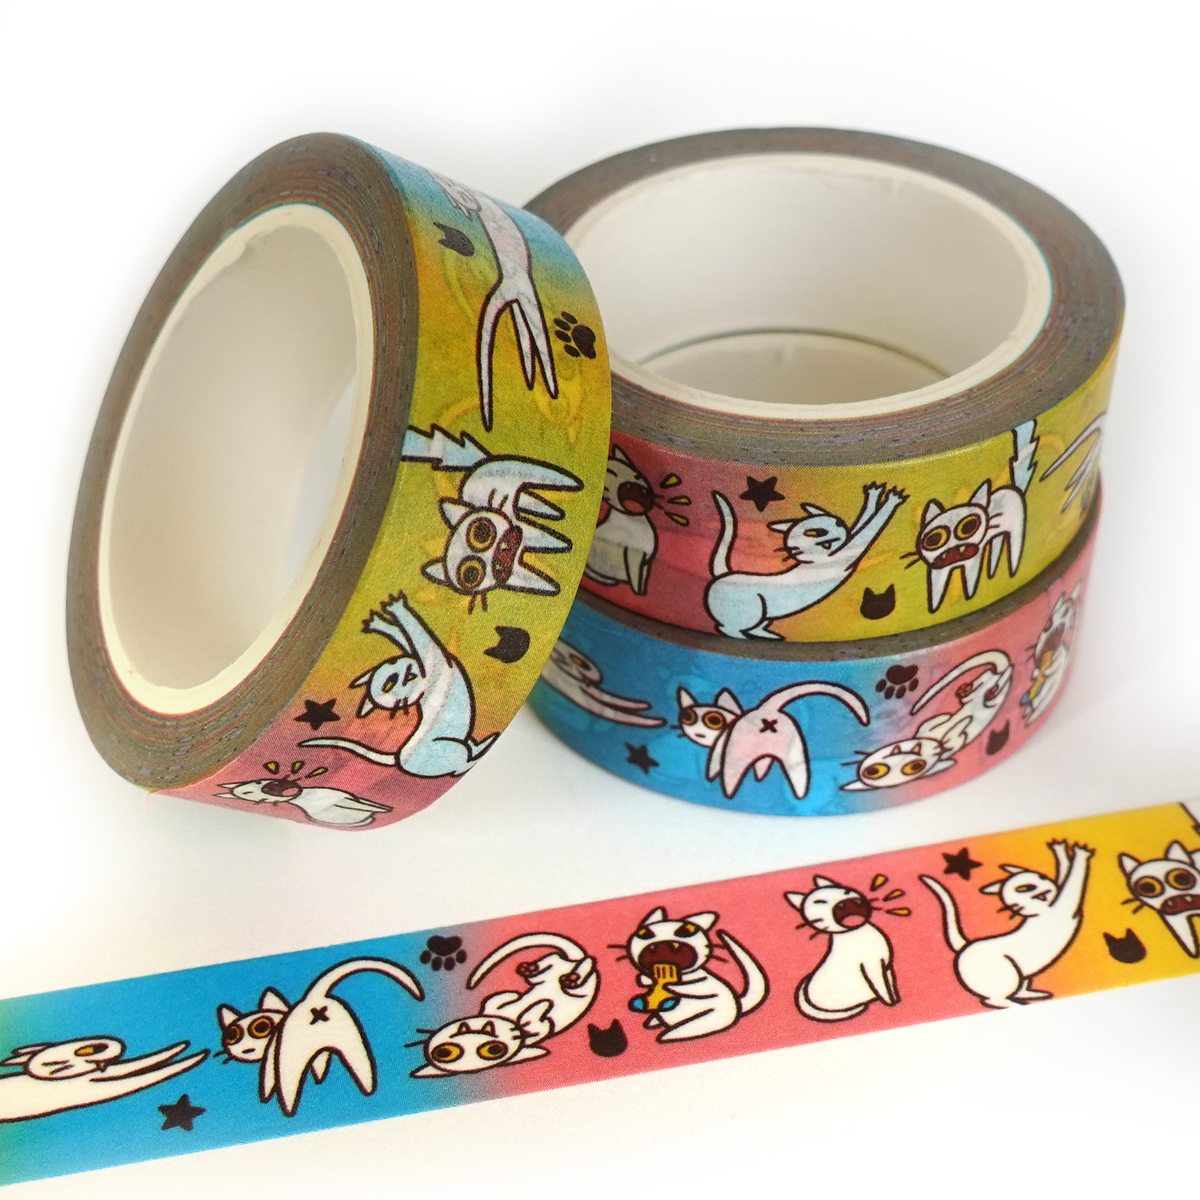 &quot;Why Bebe Why&quot; Washi Tape